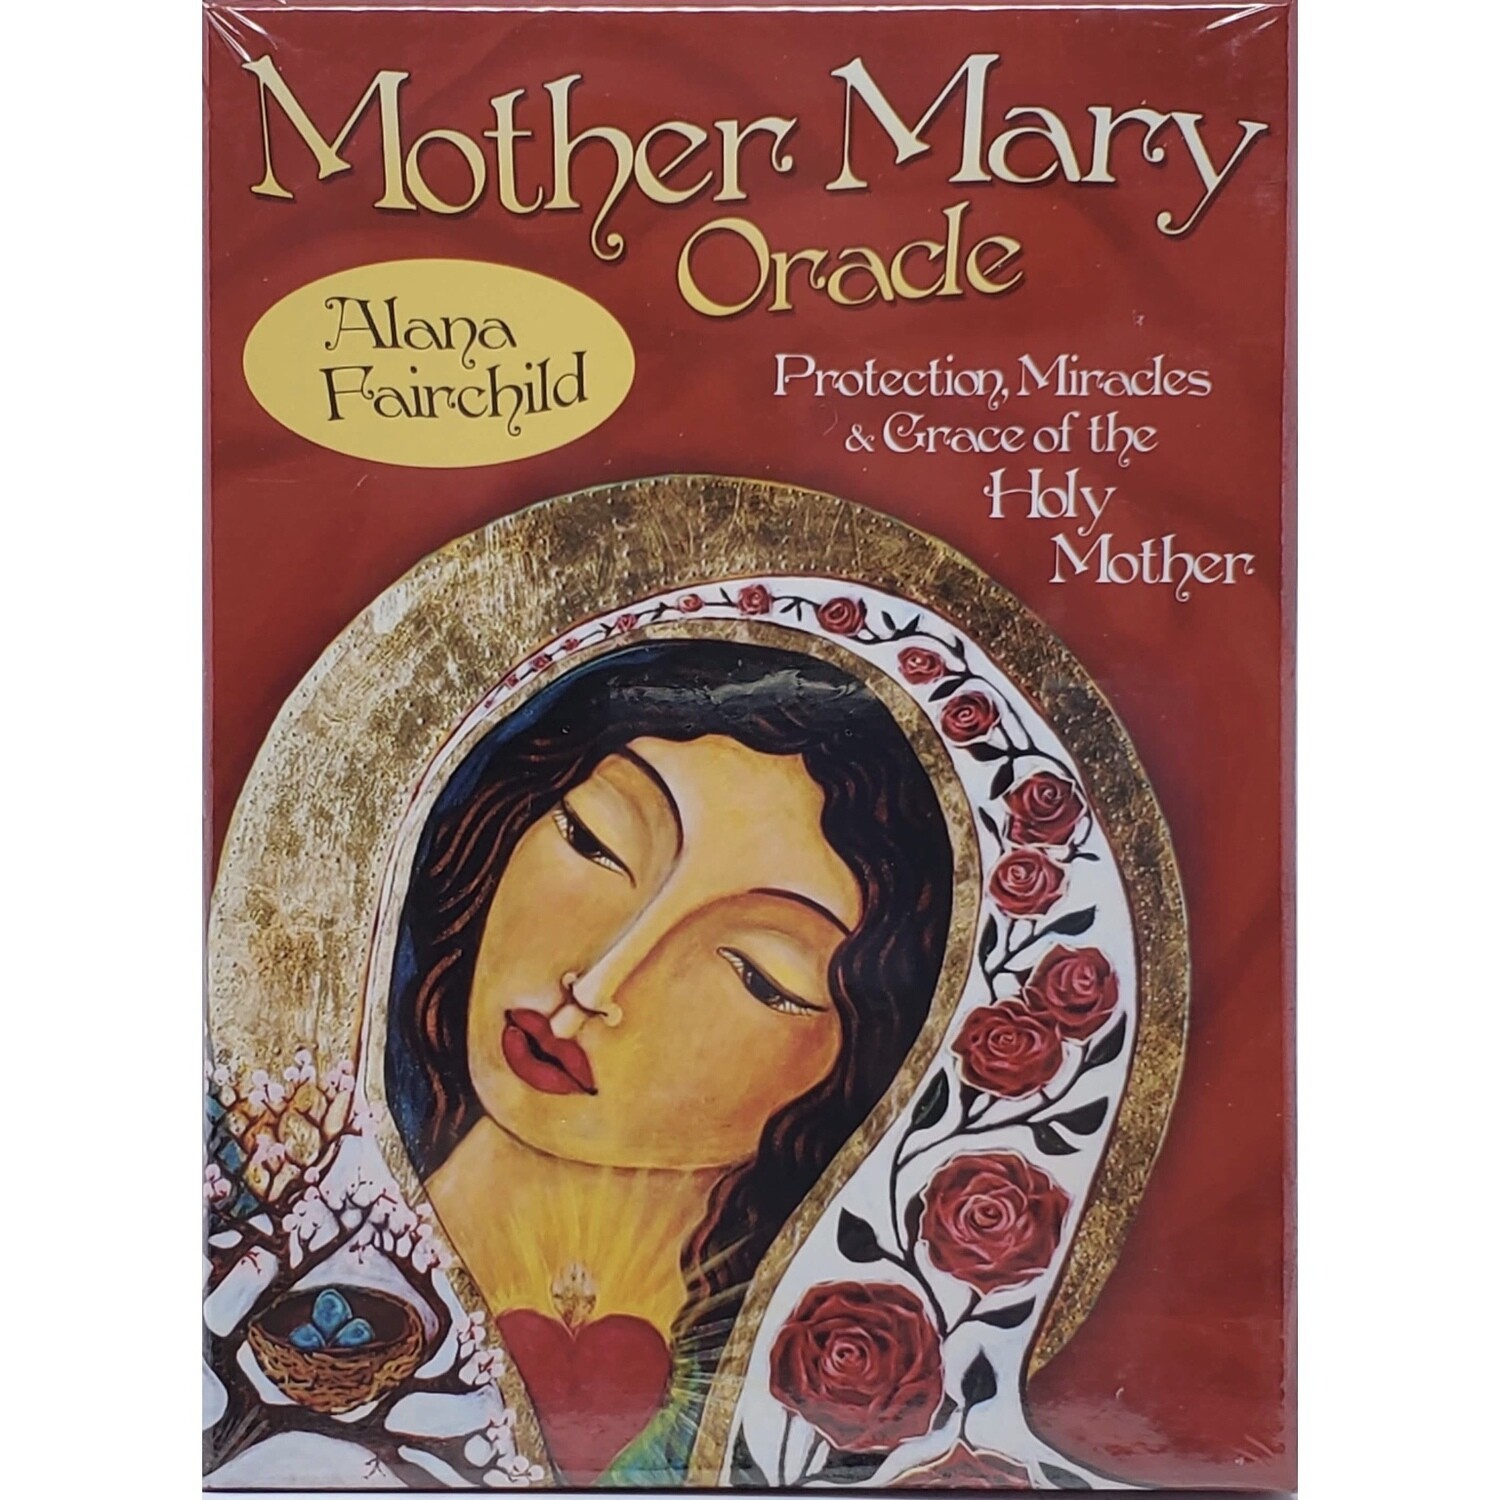 MOTHER MARY ORACLE